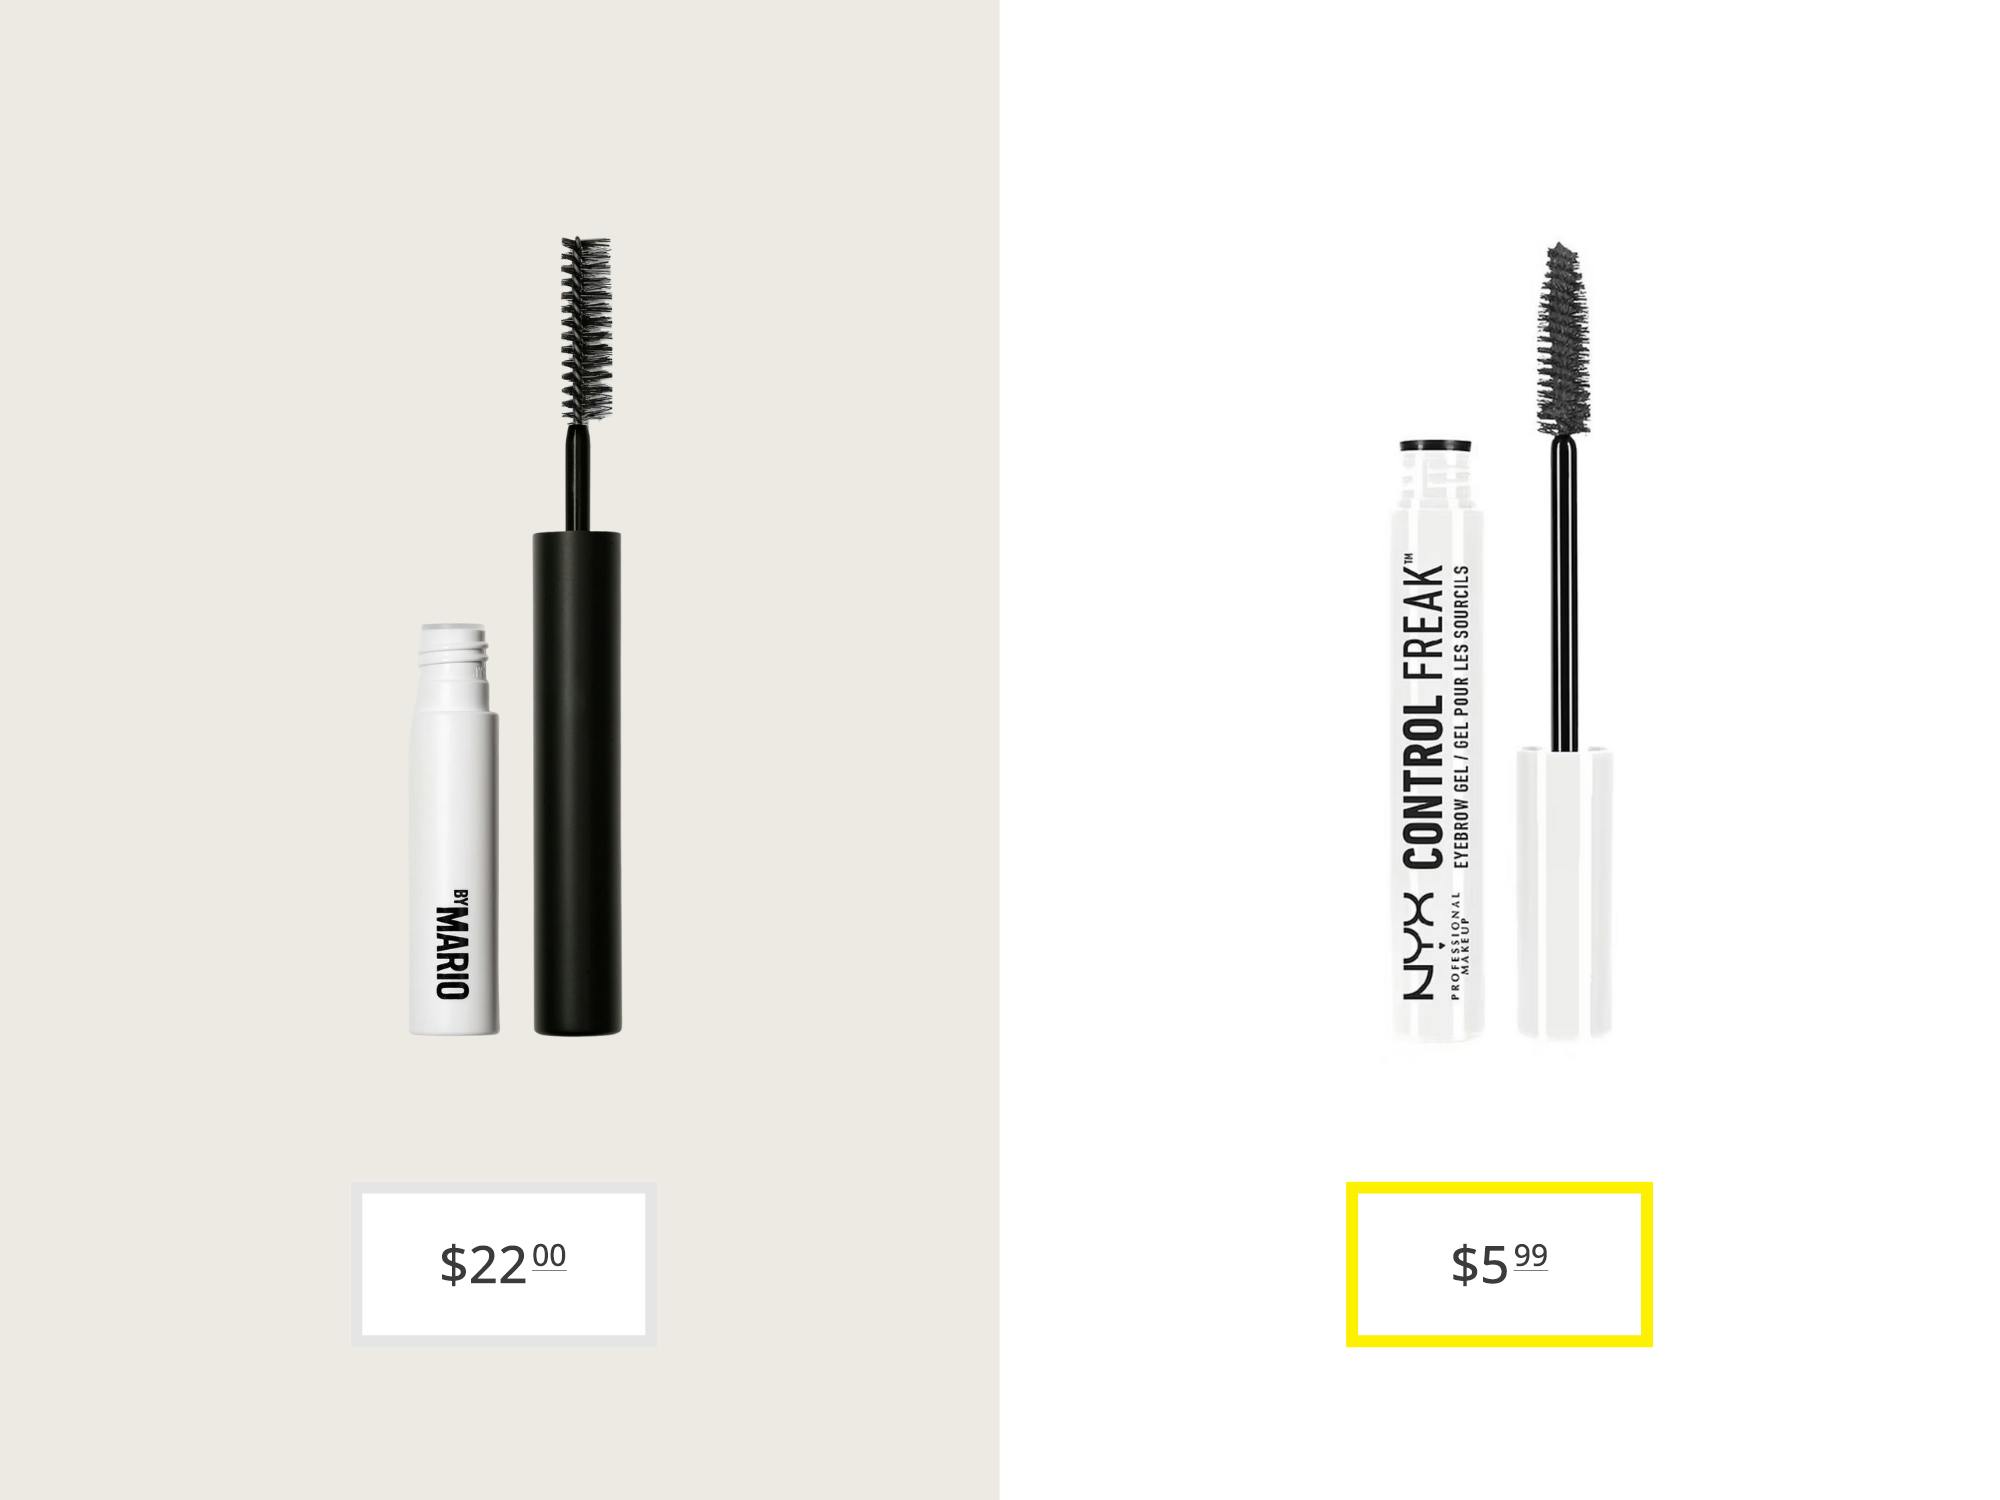 makeup by mario master hold brow gel and nyx control freak eyebrow gel price comparison graphic